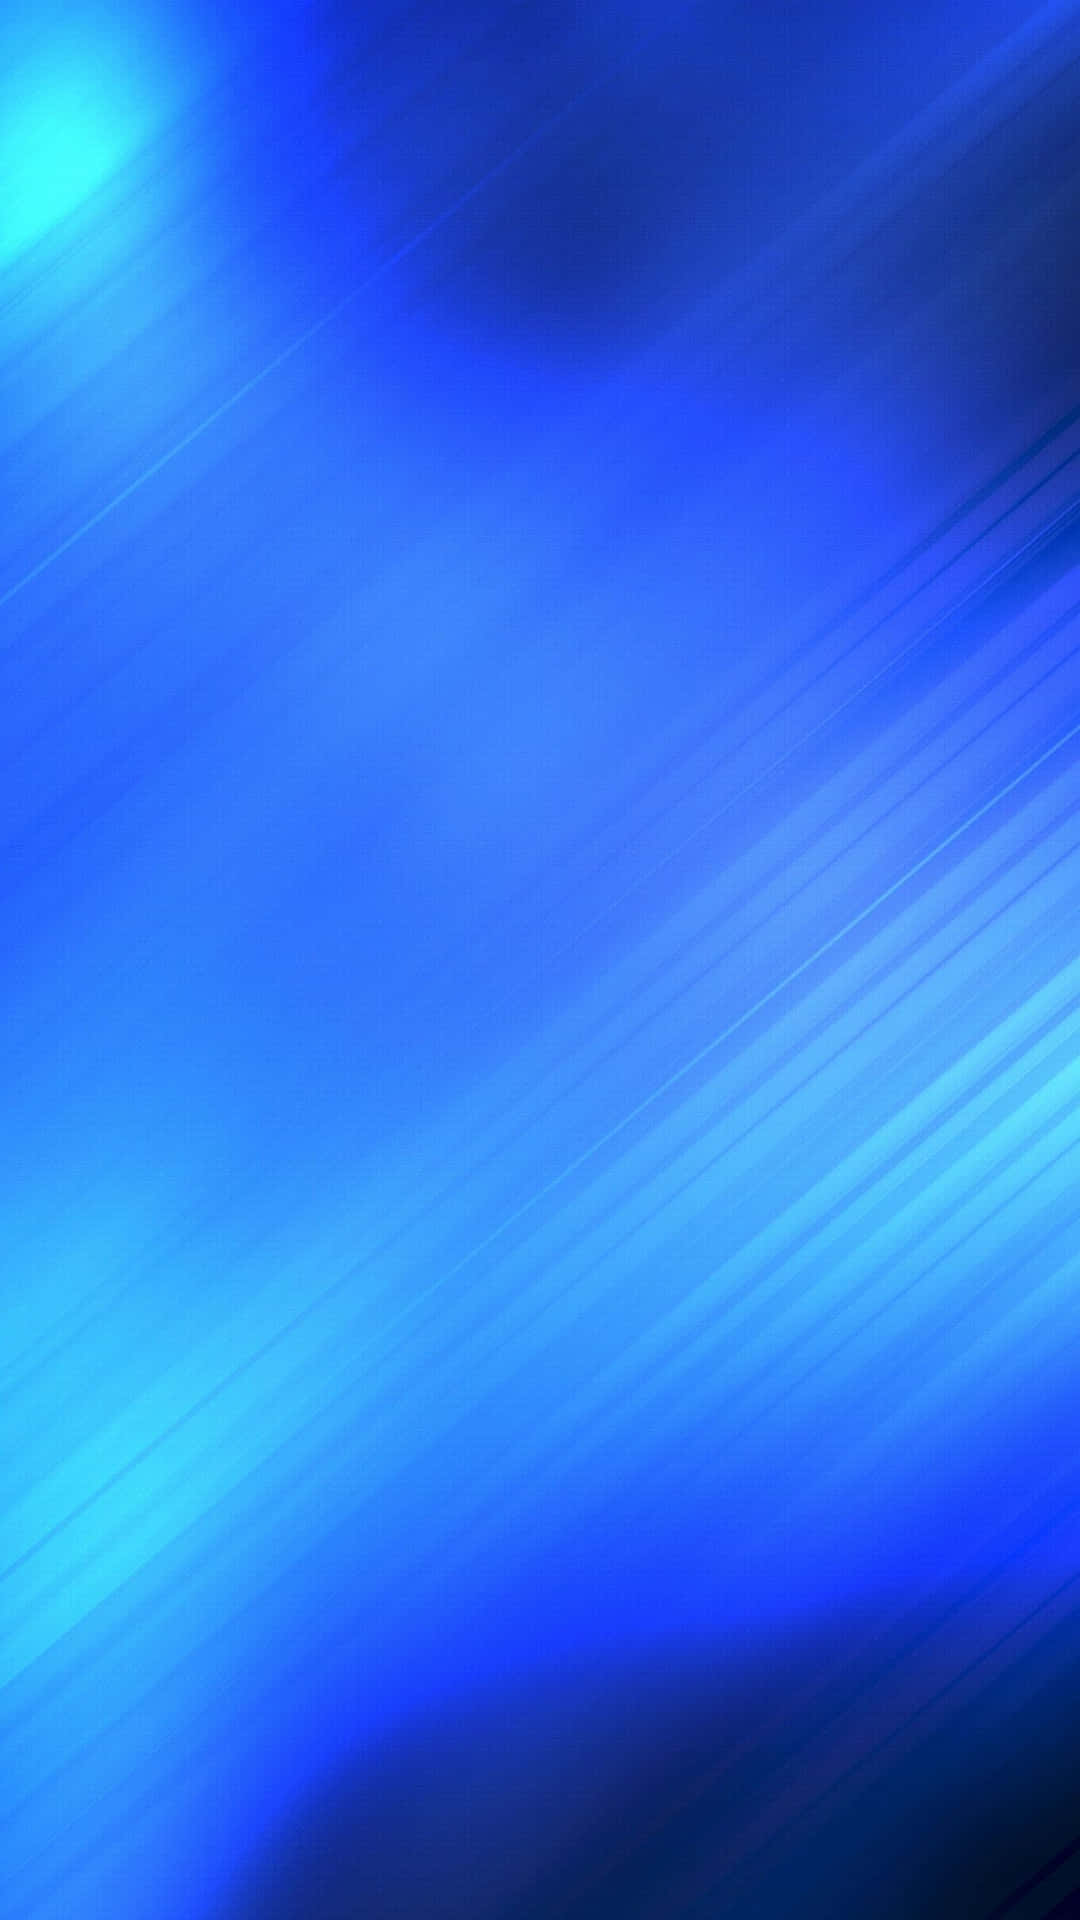 Cool Blue Abstract Wallpaper for iPhone Wallpaper